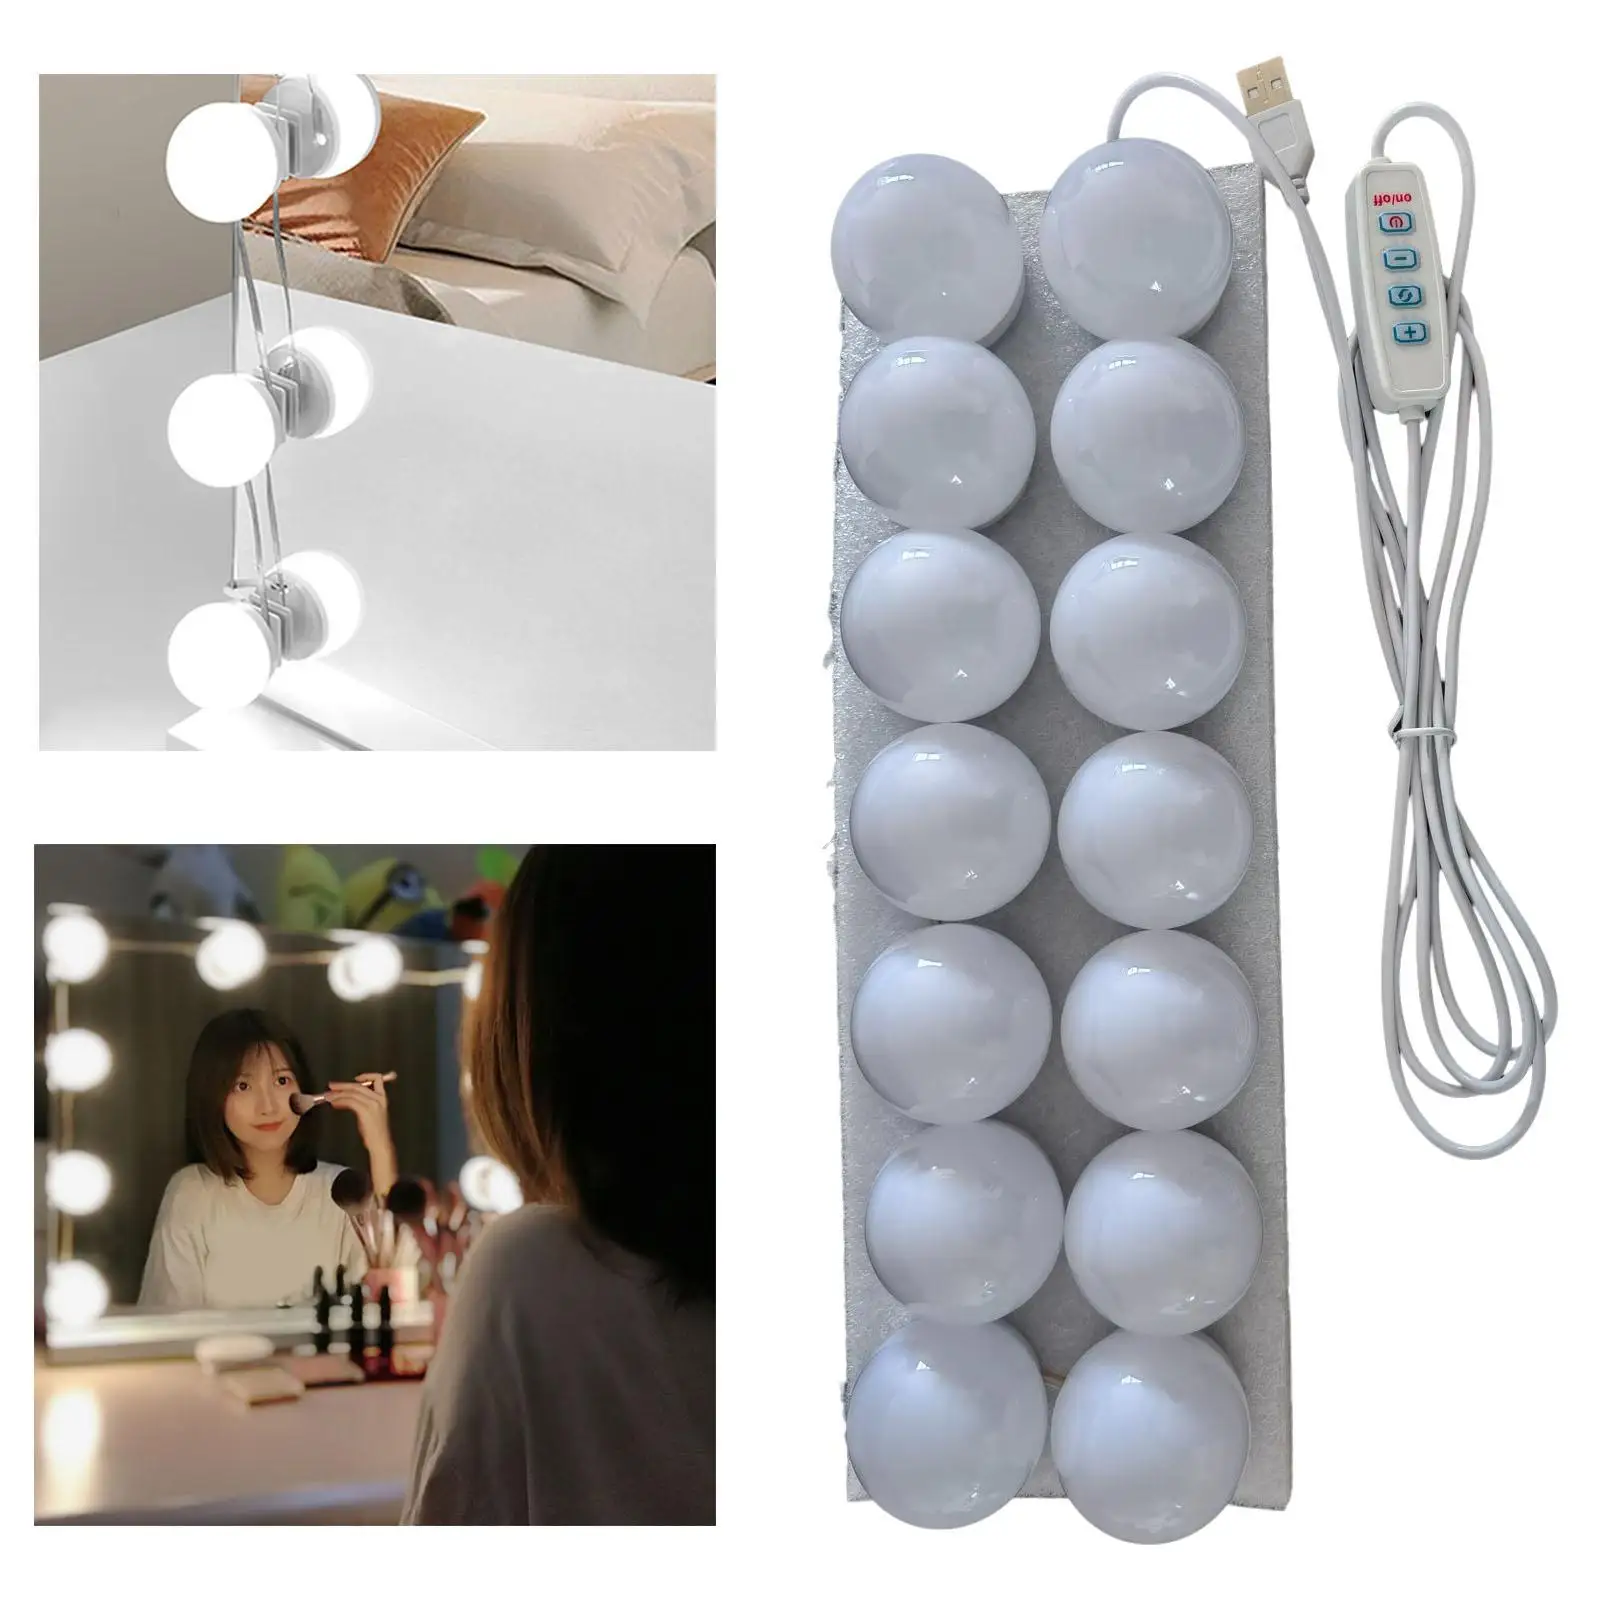 LED Makeup Mirror Lights Wall Mounted Professional Adjustable for Vanity Stick Dressing Room